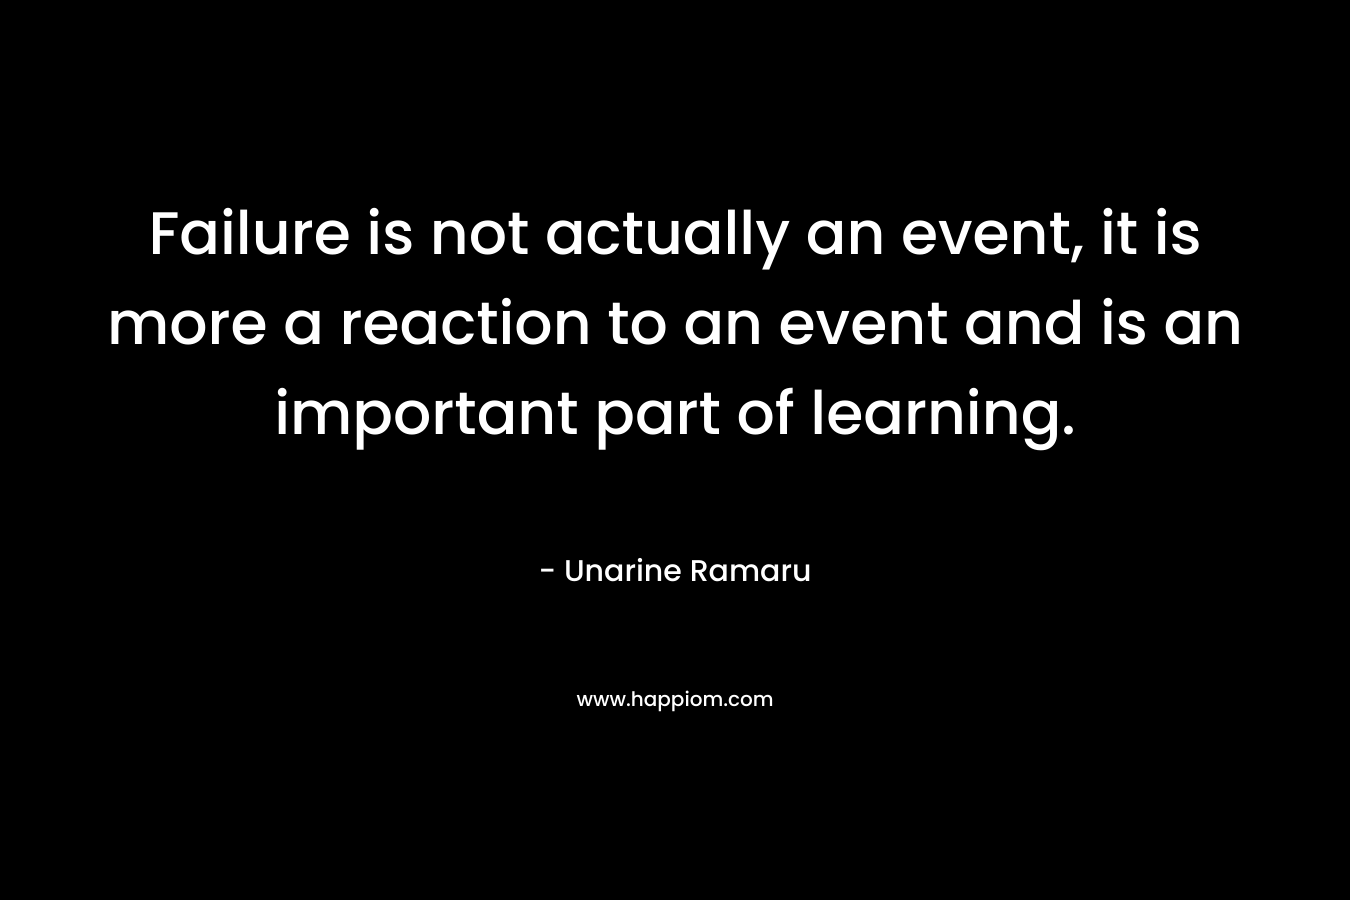 Failure is not actually an event, it is more a reaction to an event and is an important part of learning.